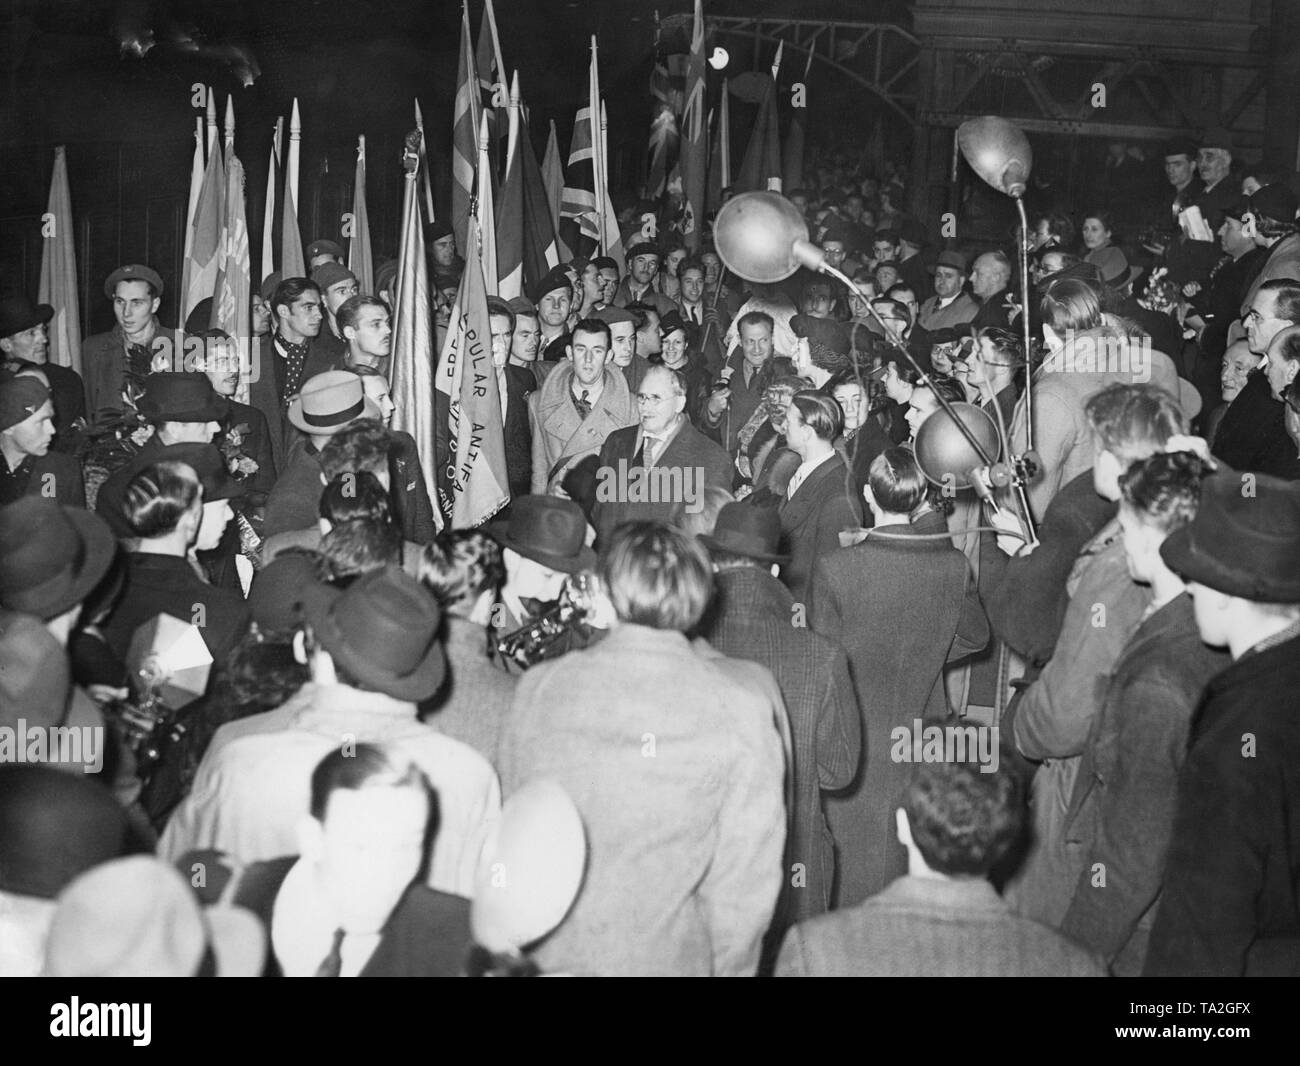 Photo of voluntary Republican Spanish fighters on their return from the Spanish Civil War at Victoria Station in London on December 7, 1938. The 400 fighters of the International Brigades were received at the station by a crowd and Socialist officials. Stock Photo